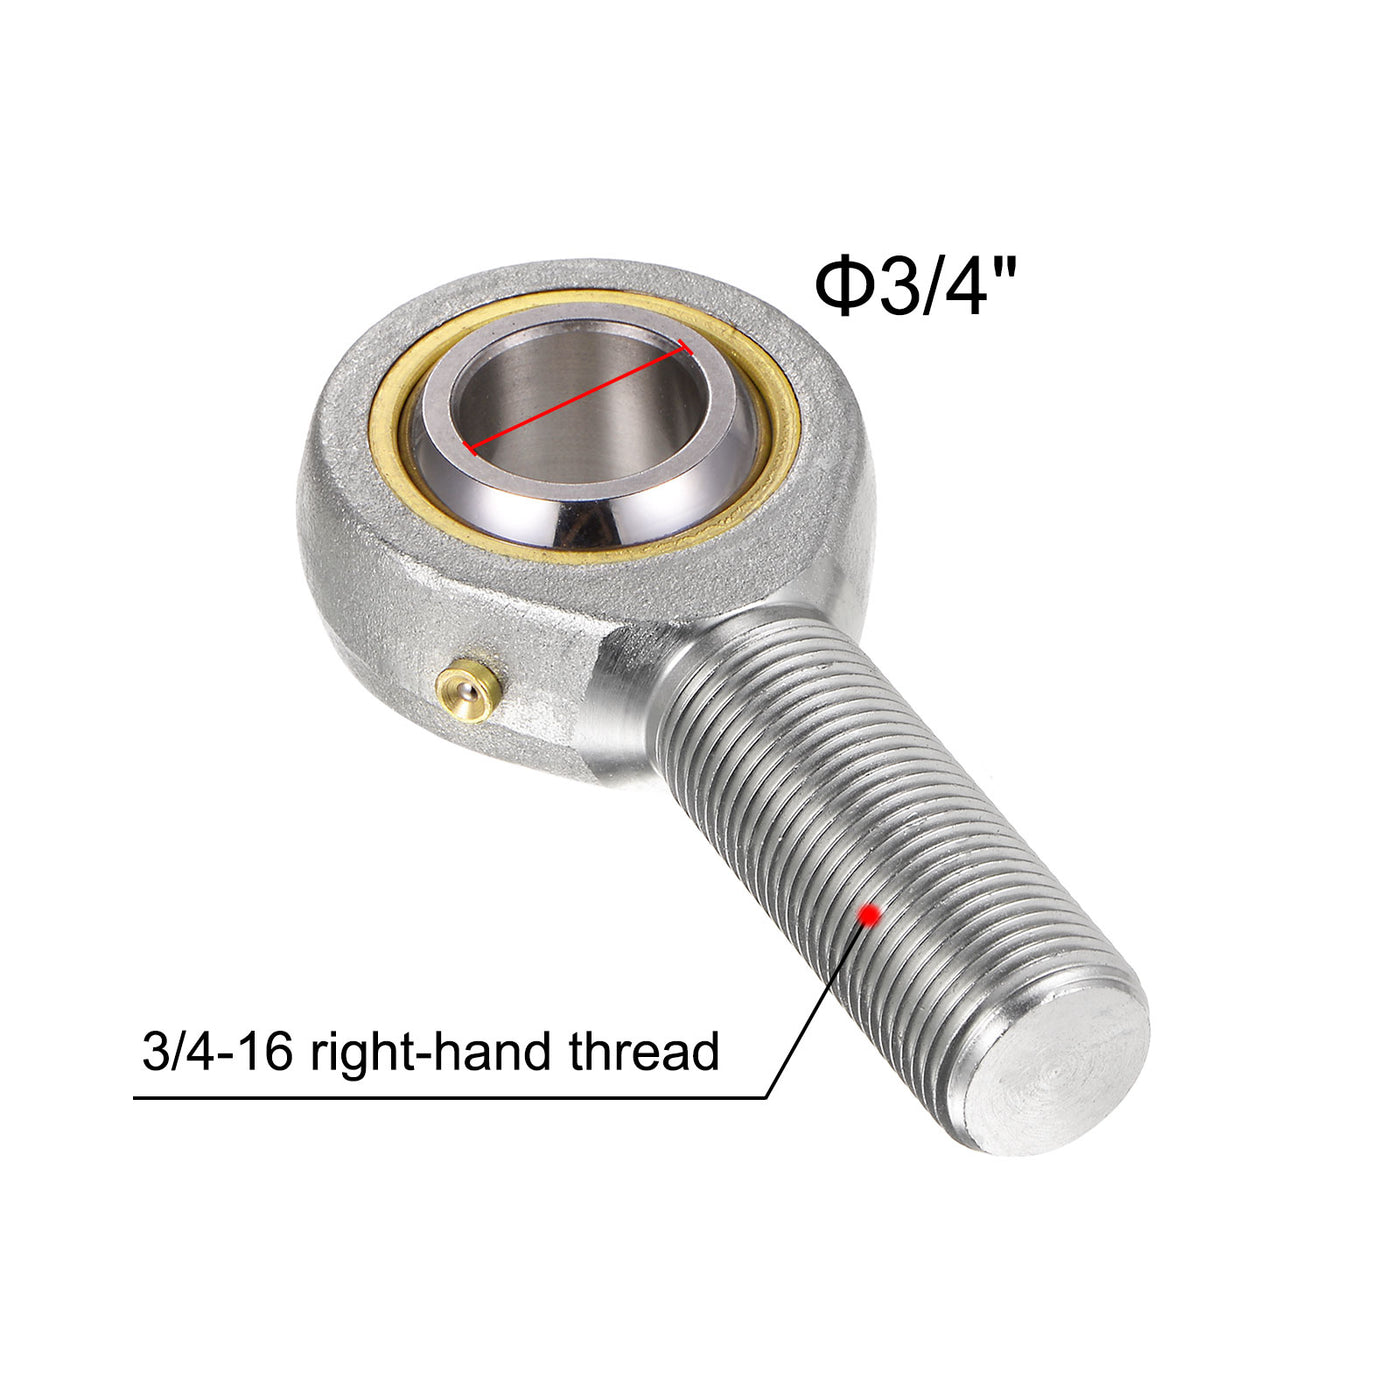 uxcell Uxcell POSB12 Male Rod End 3/4" Bore and 3/4-16 Right Hand Thread,Includes Jam Nut